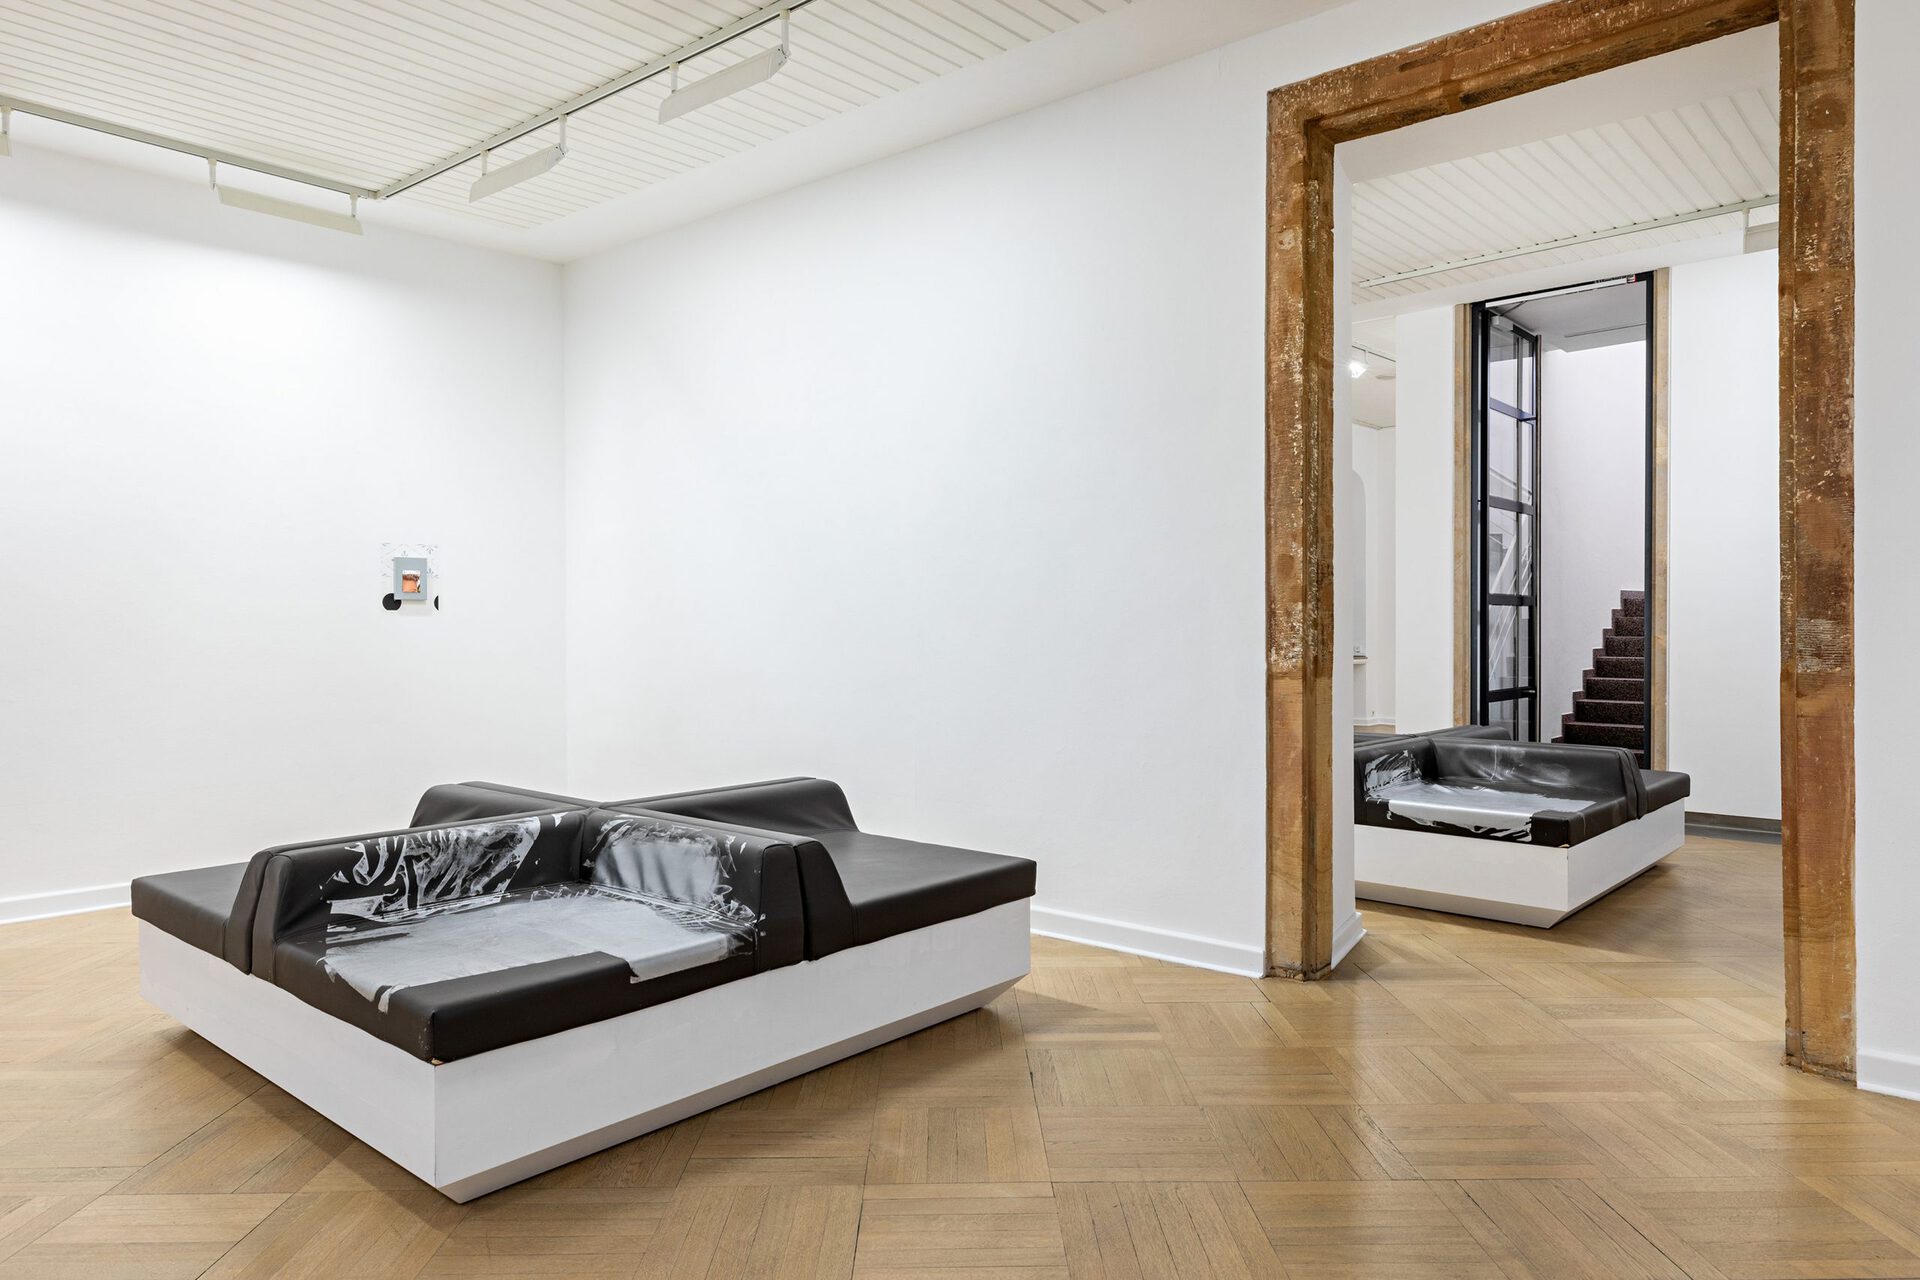 Lorenza Longhi, Caretaker(s), 2021; Panoramic Couch 1, 2021; Panoramic Couch 2, 2021; exhibition view THE EQUALITY OF POSSIBILITY, Kunstverein Bielefeld, 2021. Photo: Fred Dott